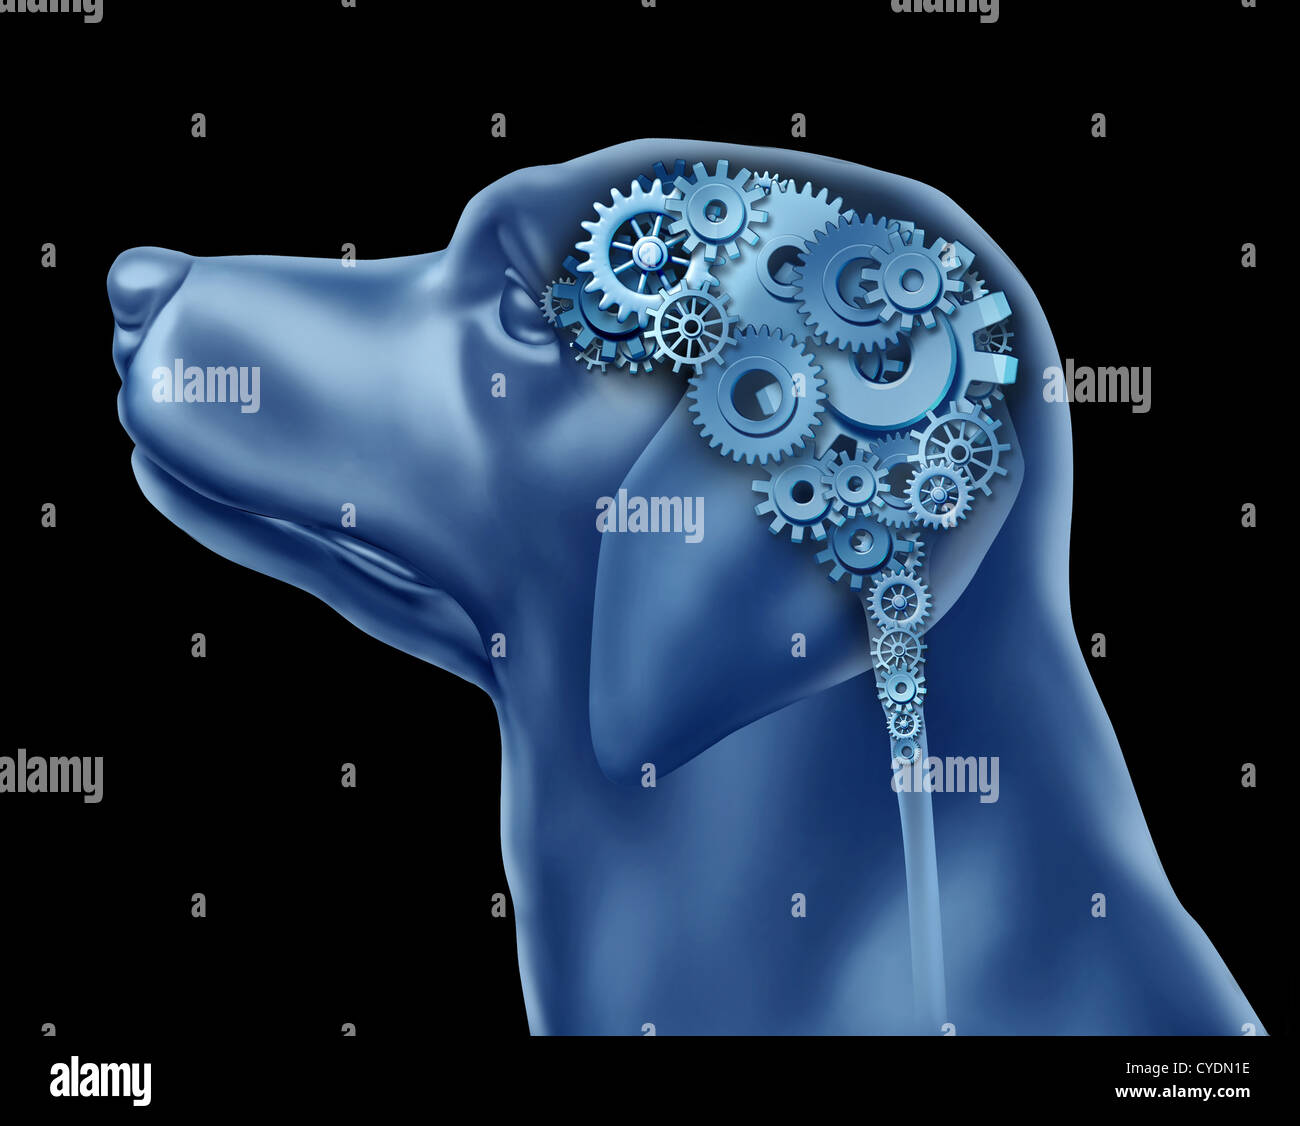 Dog intelligence and training animal symbol for pet mental health care as a concept with a canine side view of the head with gears and cogs in the shape of a brain as an icon of veterinary services. Stock Photo